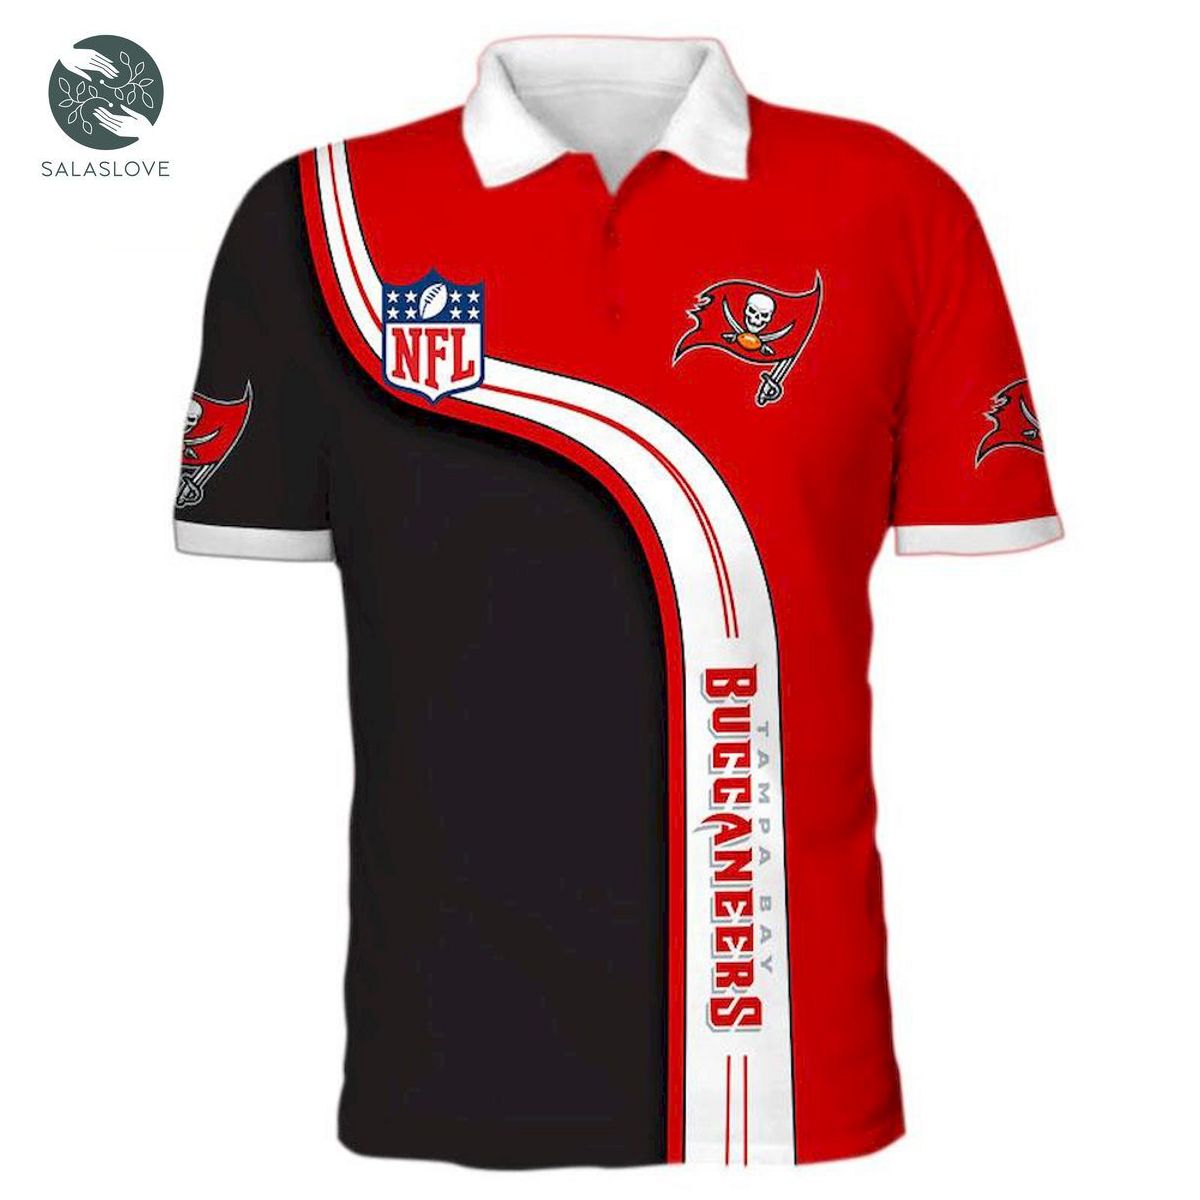 Tampa Bay Buccaneers NFL Polo Shirt